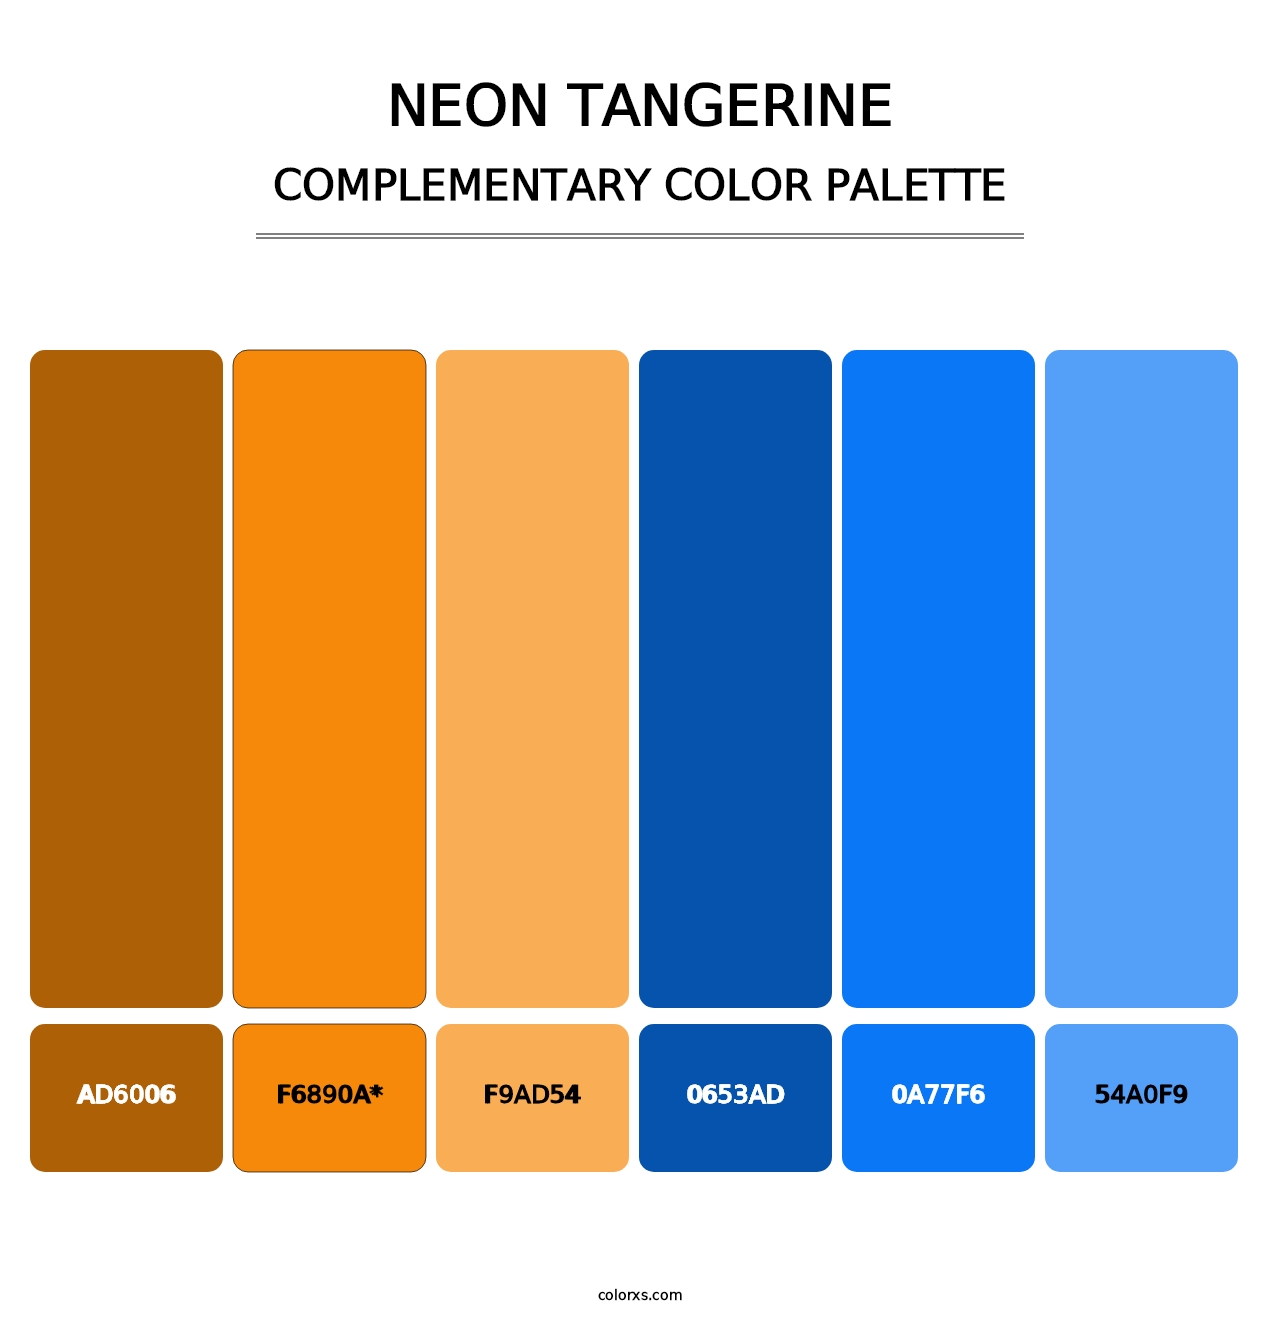 Neon Tangerine - Complementary Color Palette